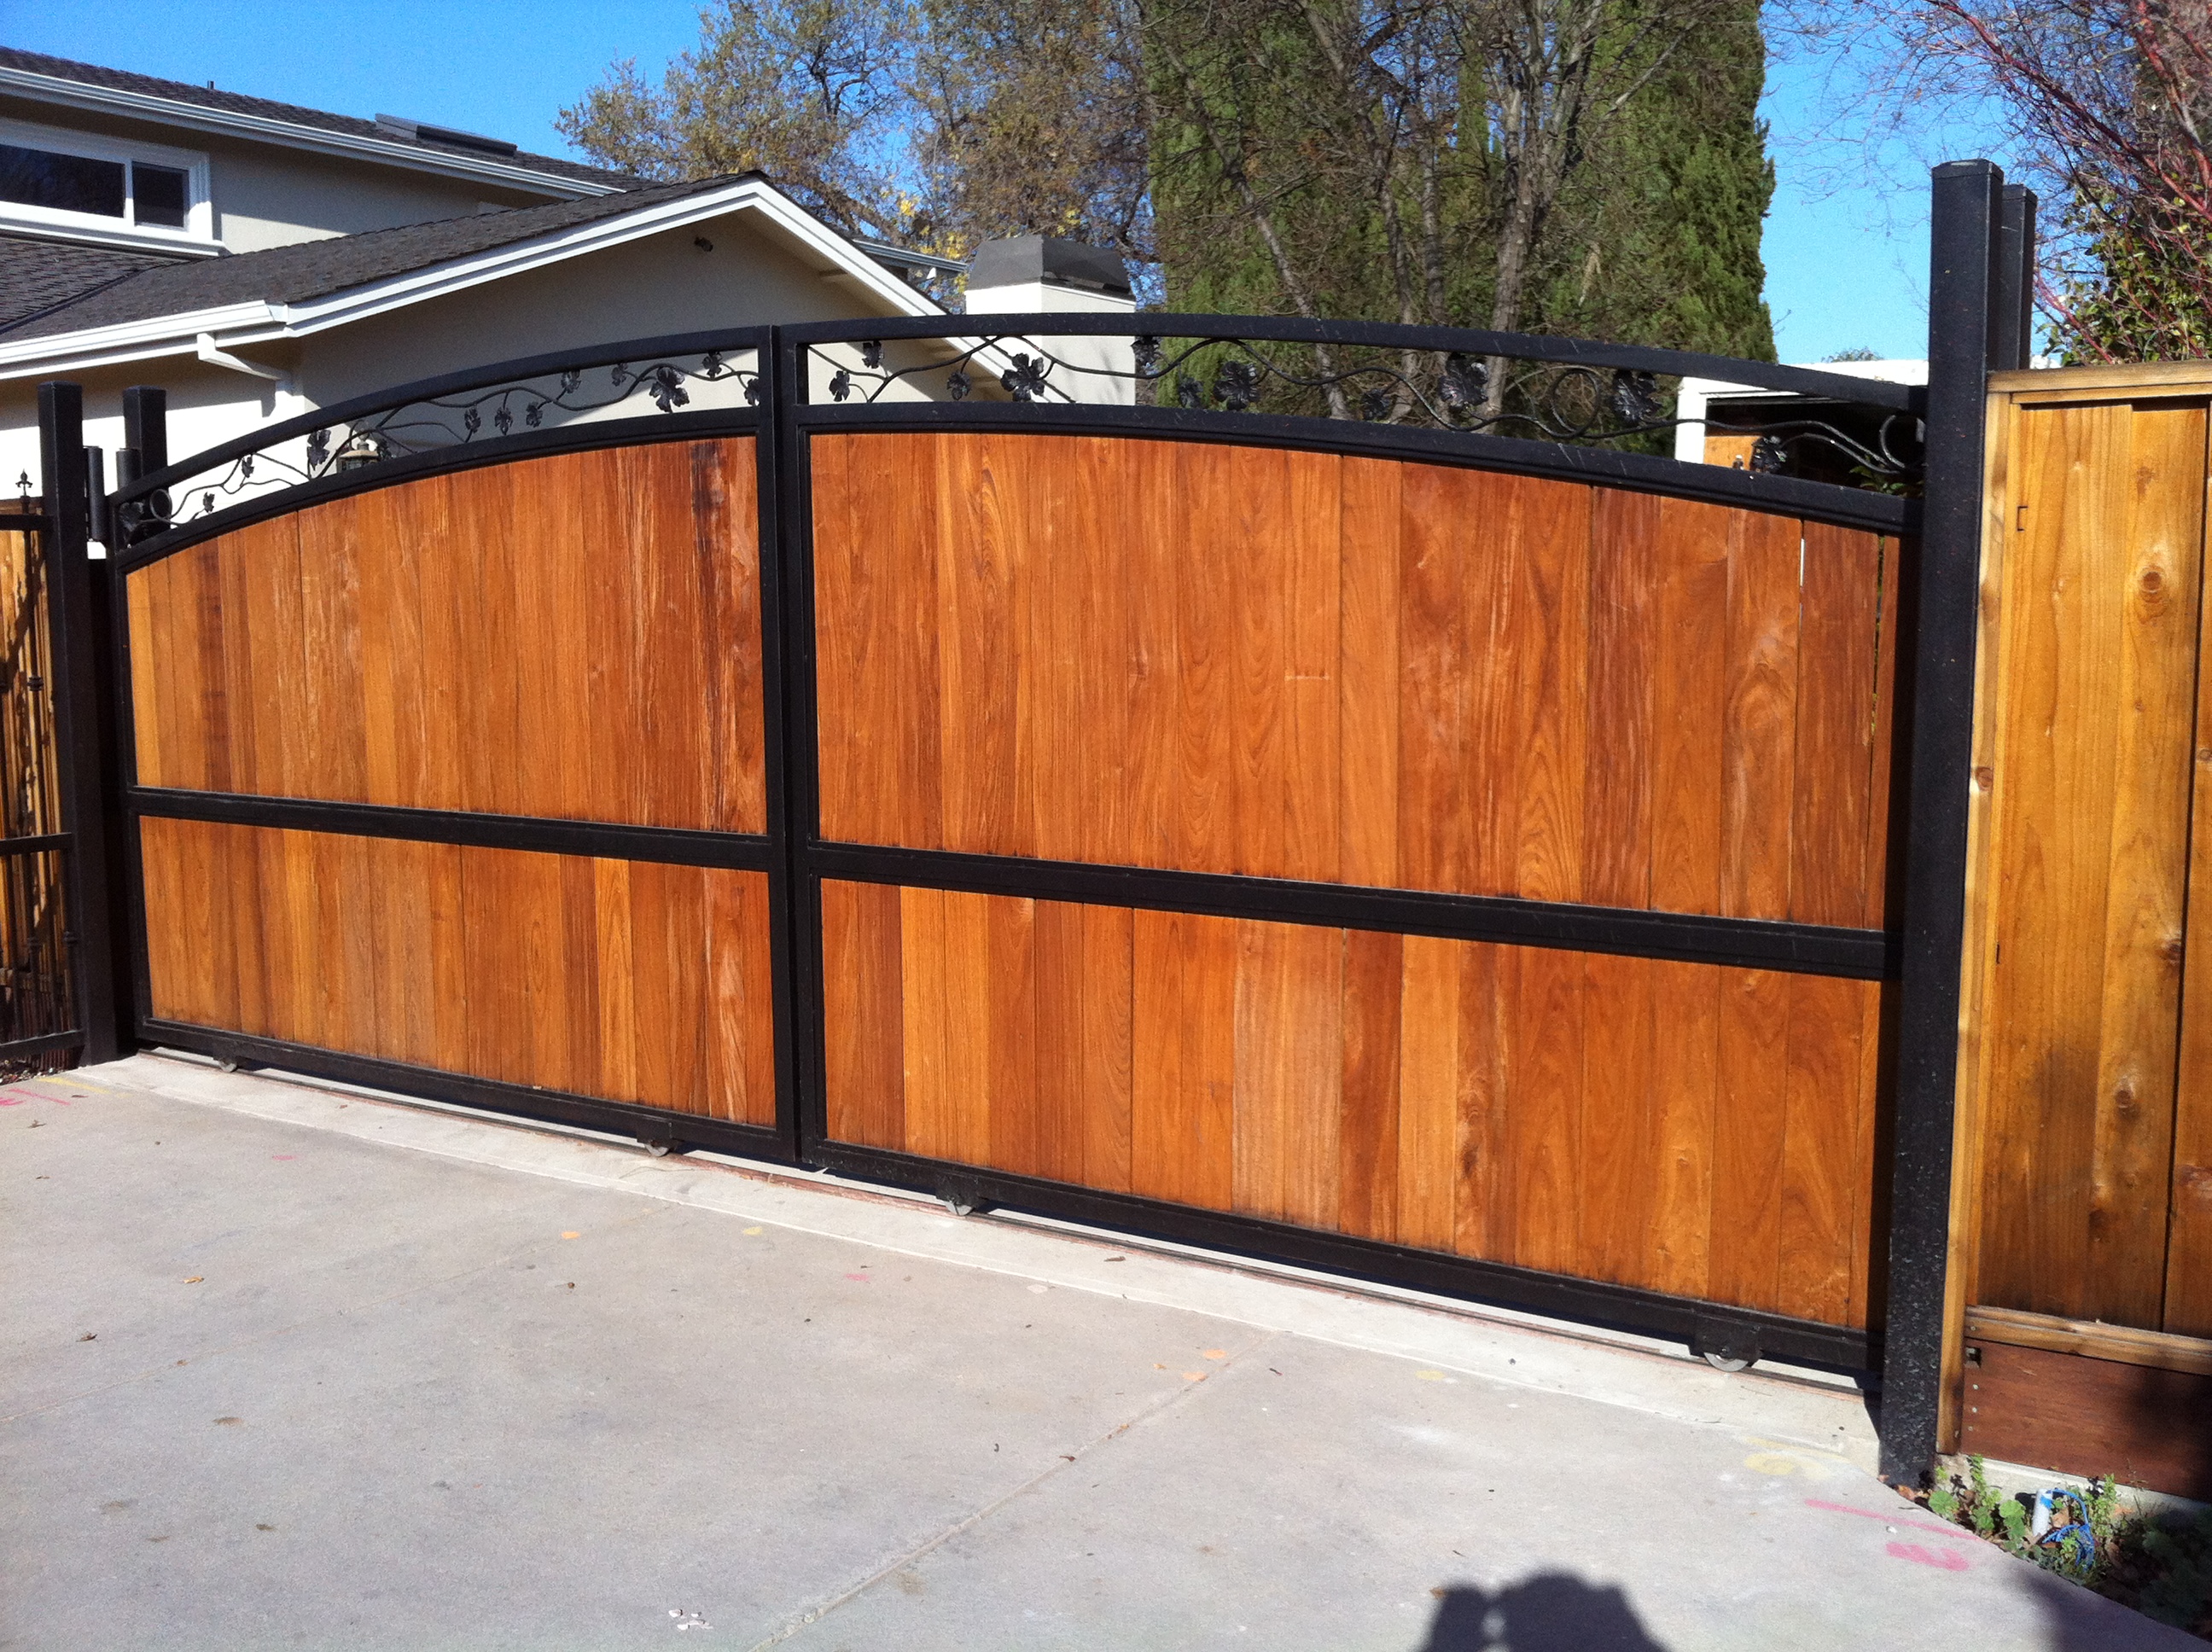 Gates » V & M Iron works inc. in the San Jose Bay Area